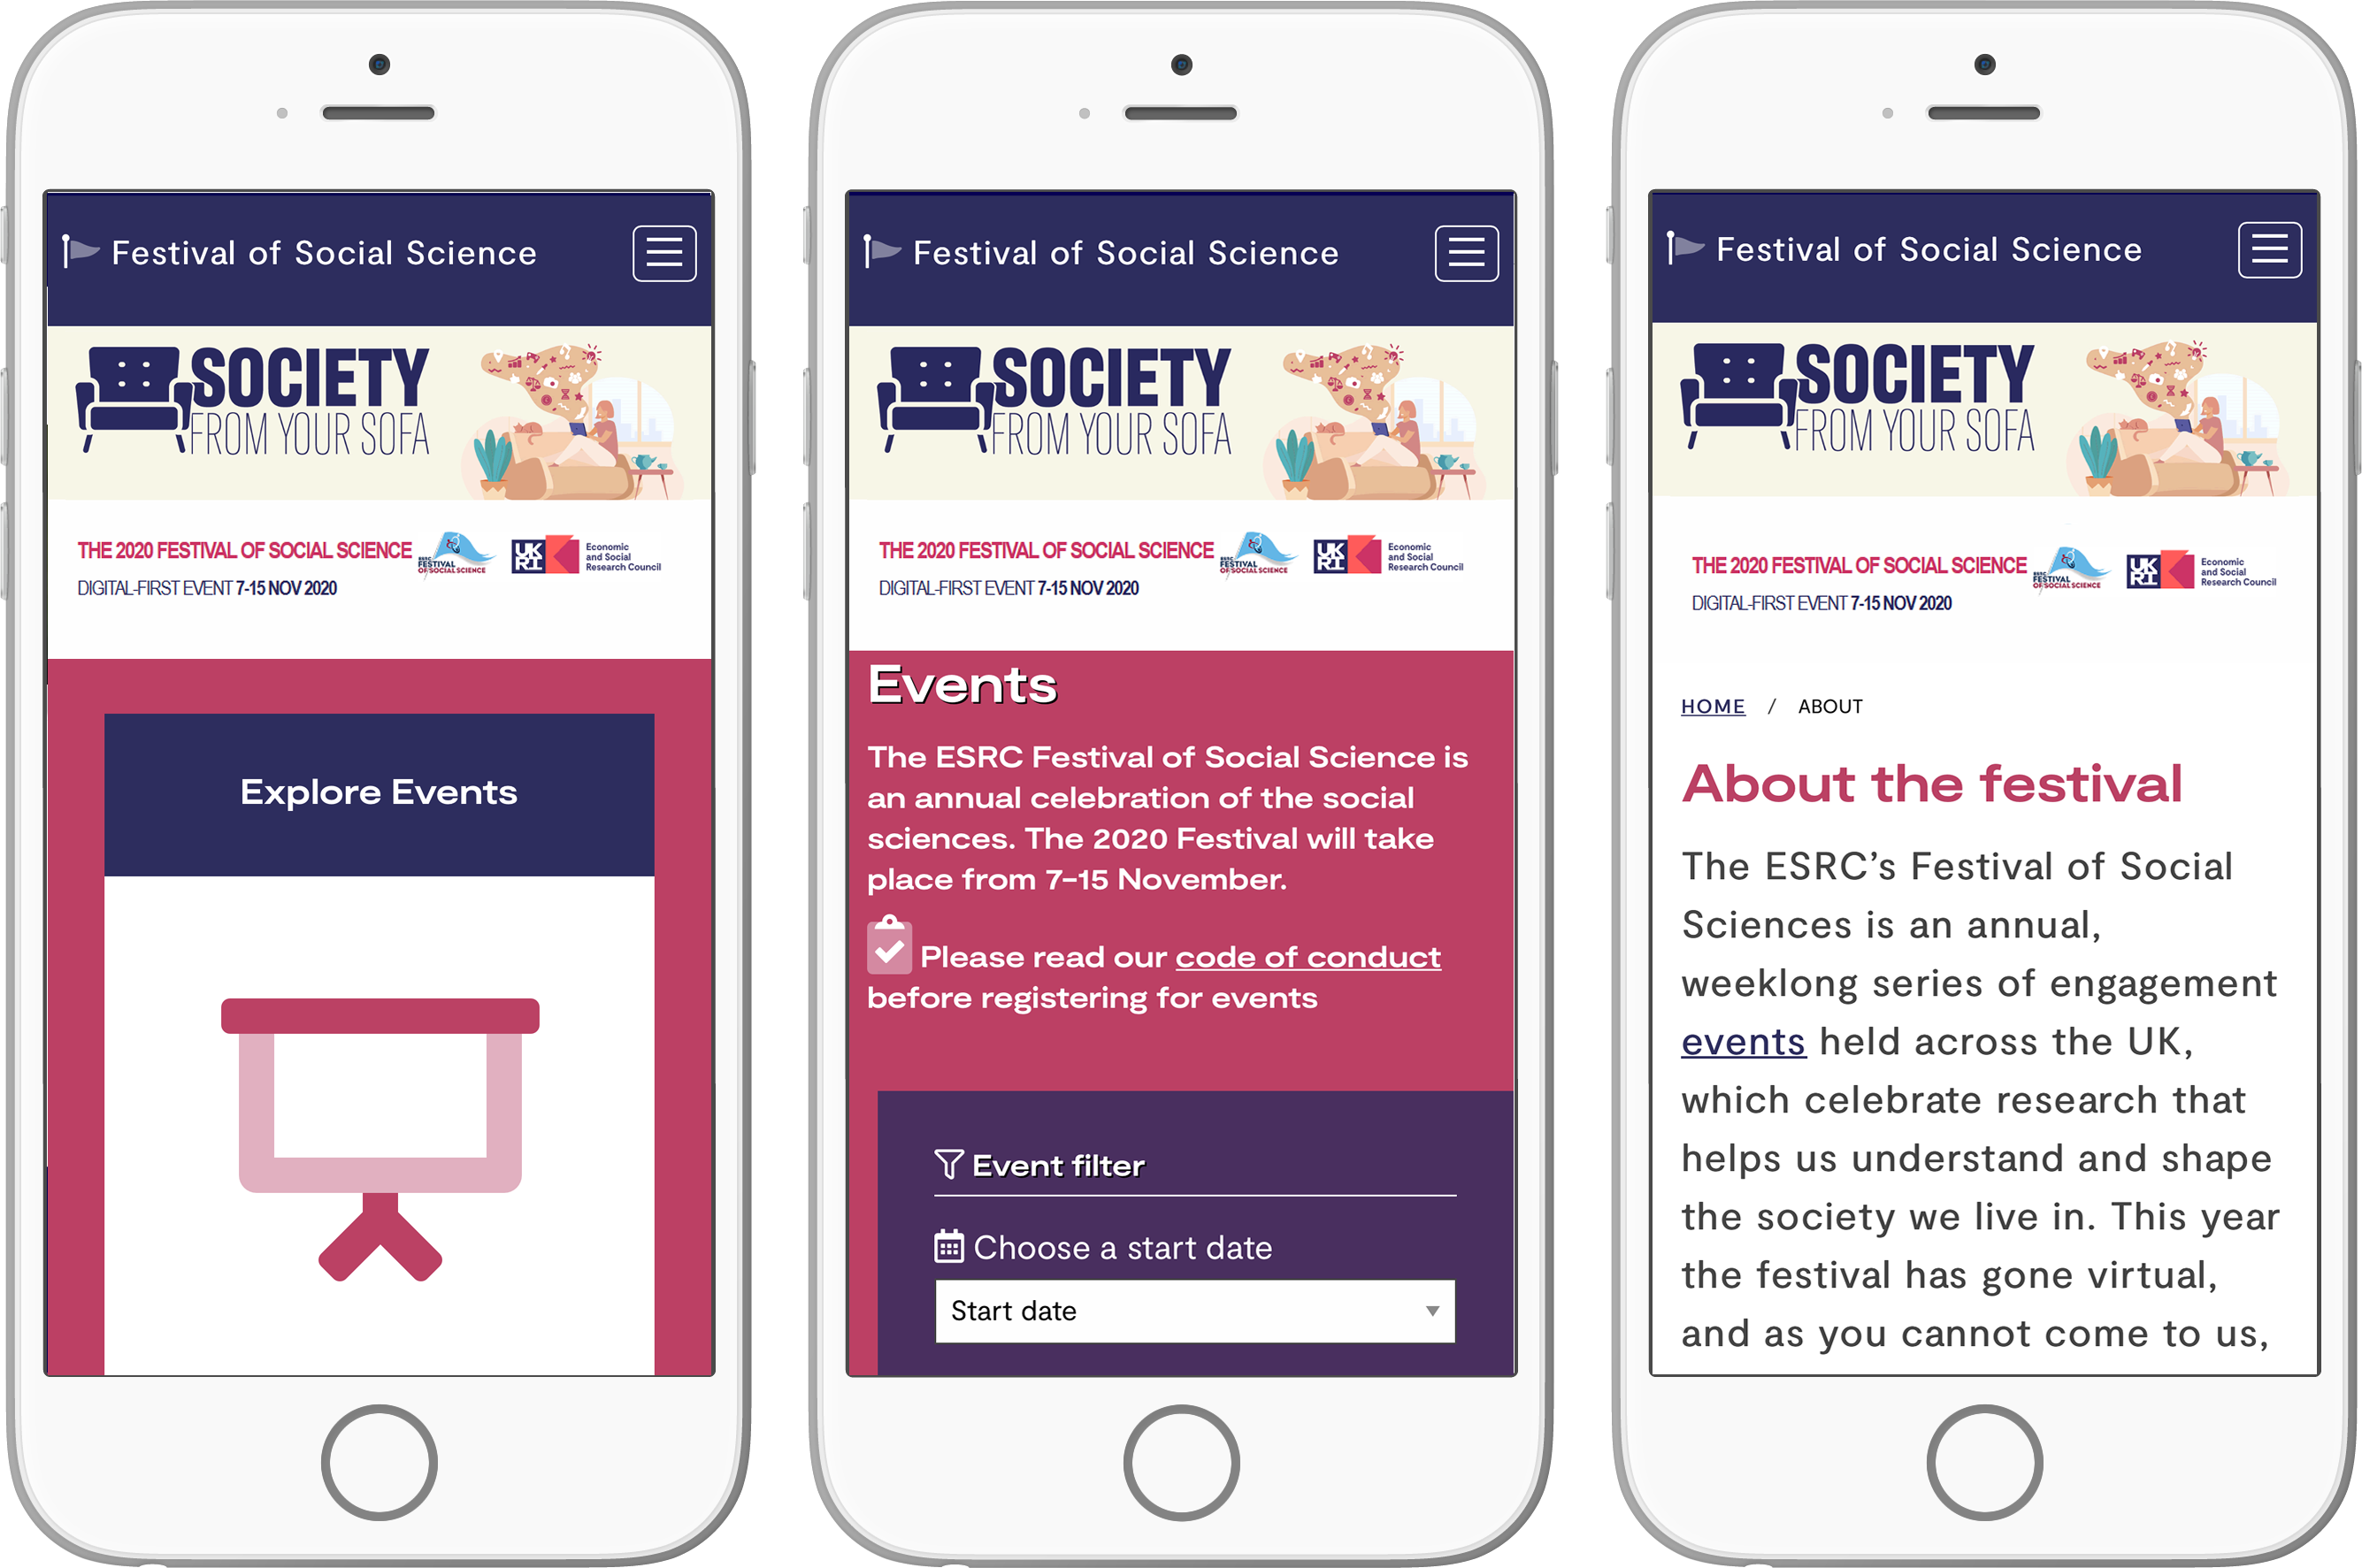 Mobile views of the Festival of Social Science website